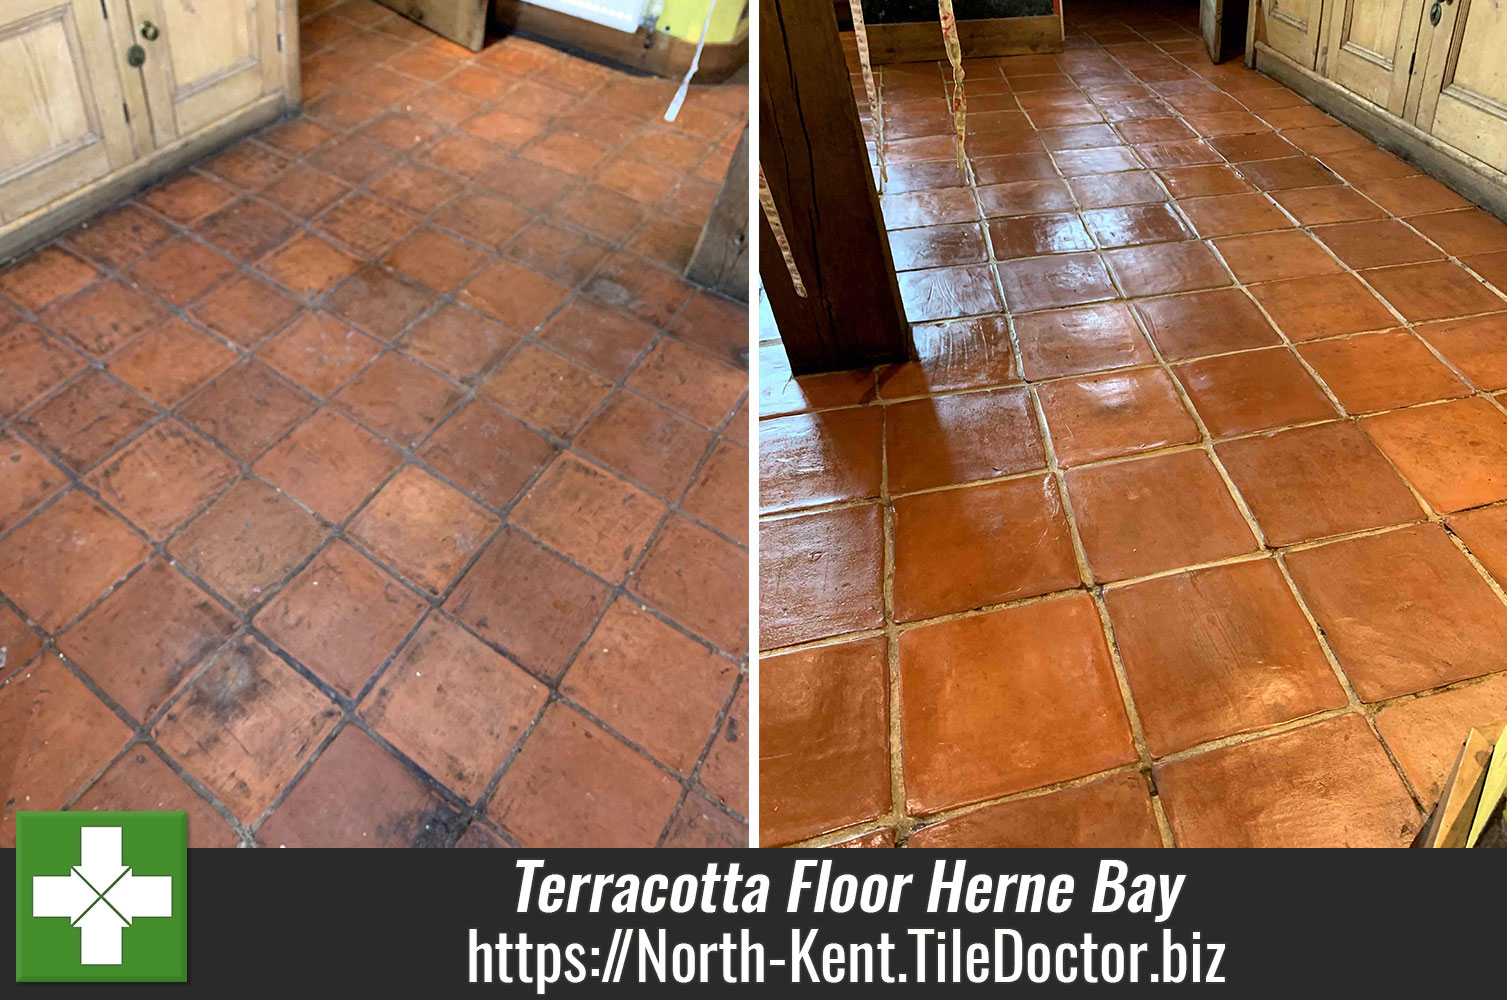 Deep Cleaning Terracotta Tile and Grout with Tile Doctor Pro-Clean in Herne Bay